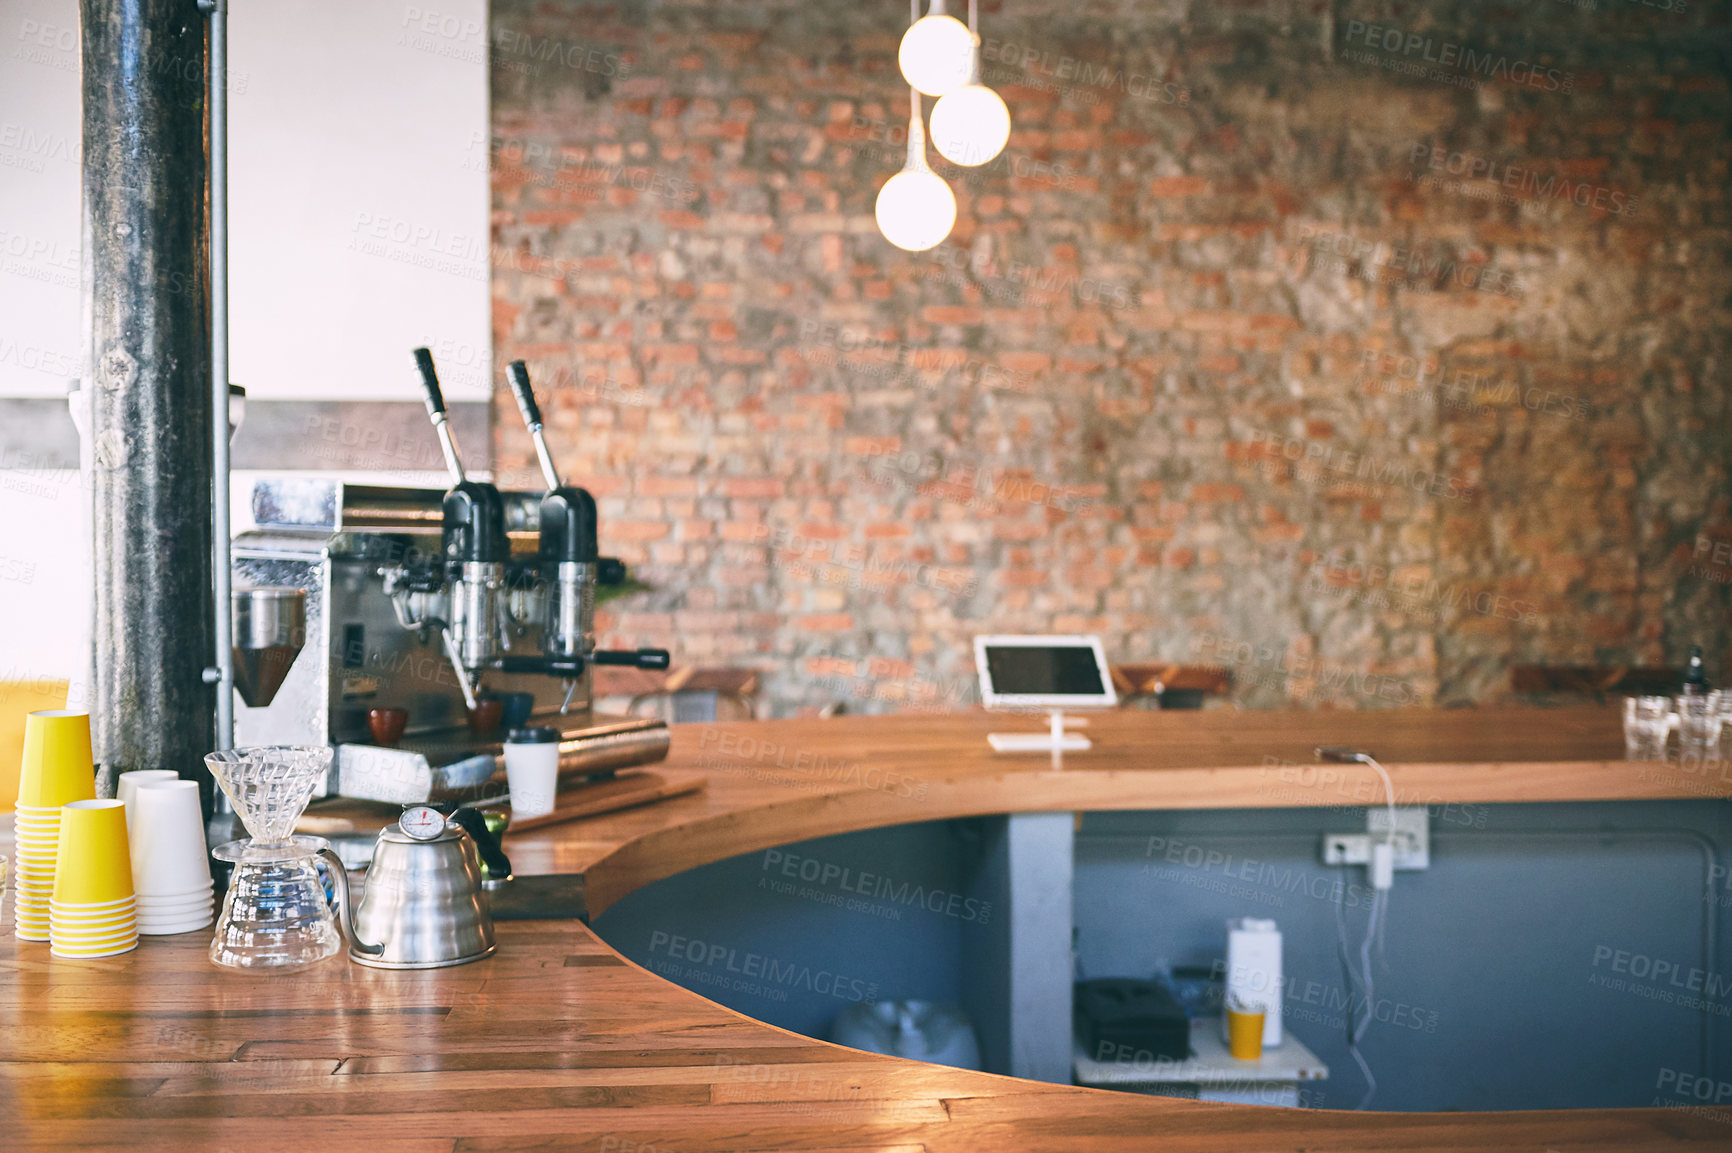 Buy stock photo Shot of a coffee maker on a counter in an empty cafe